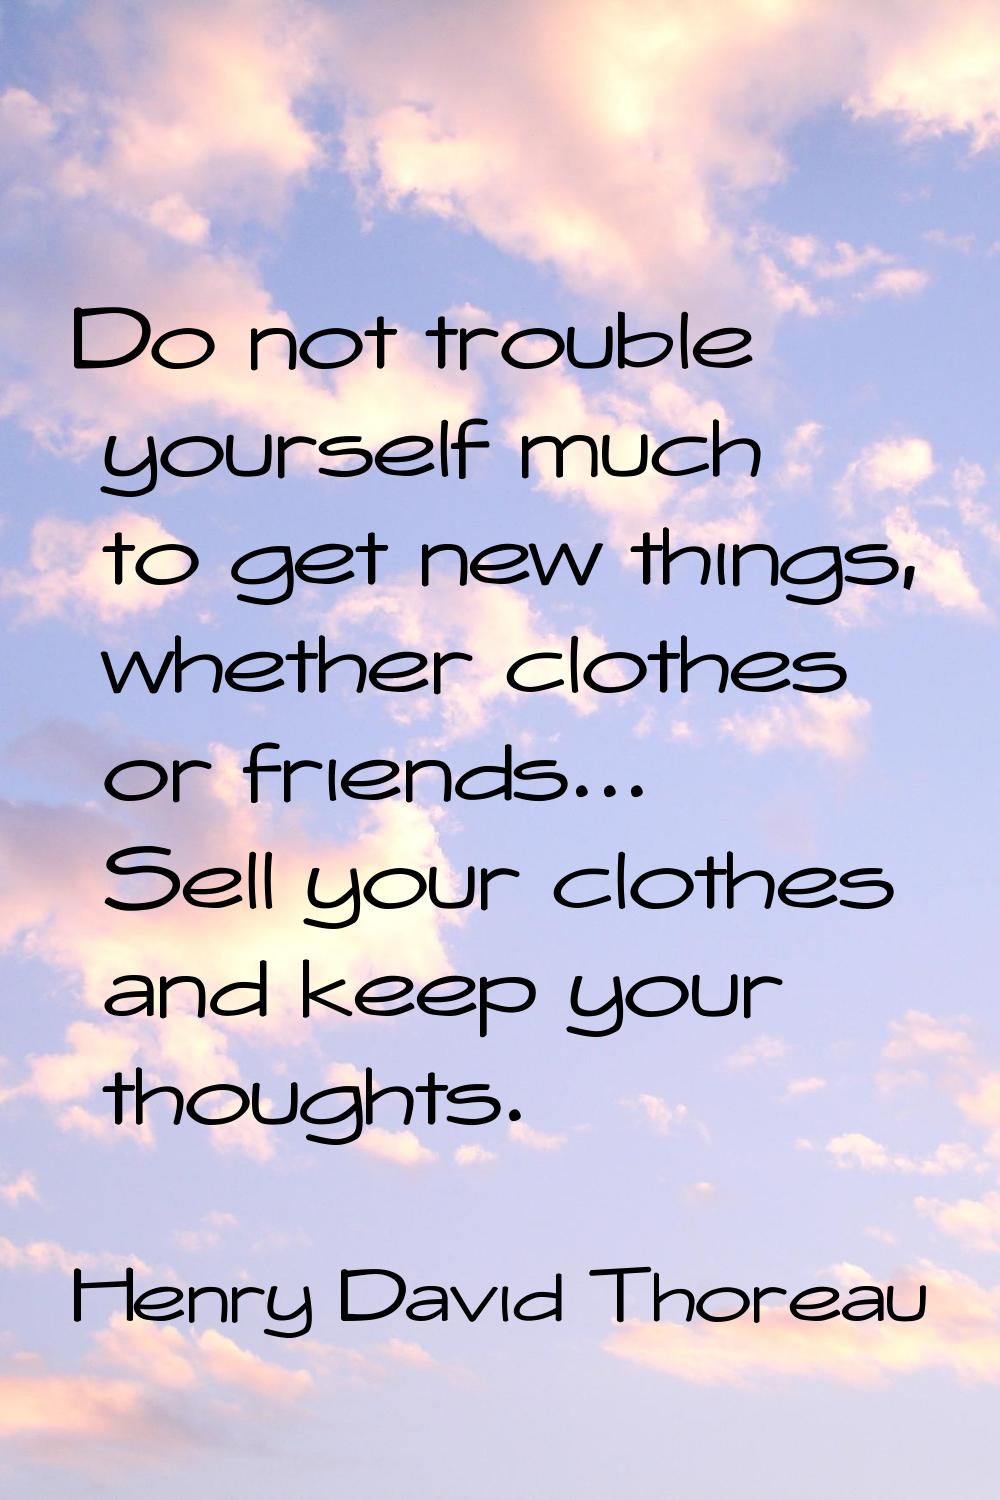 Do not trouble yourself much to get new things, whether clothes or friends... Sell your clothes and